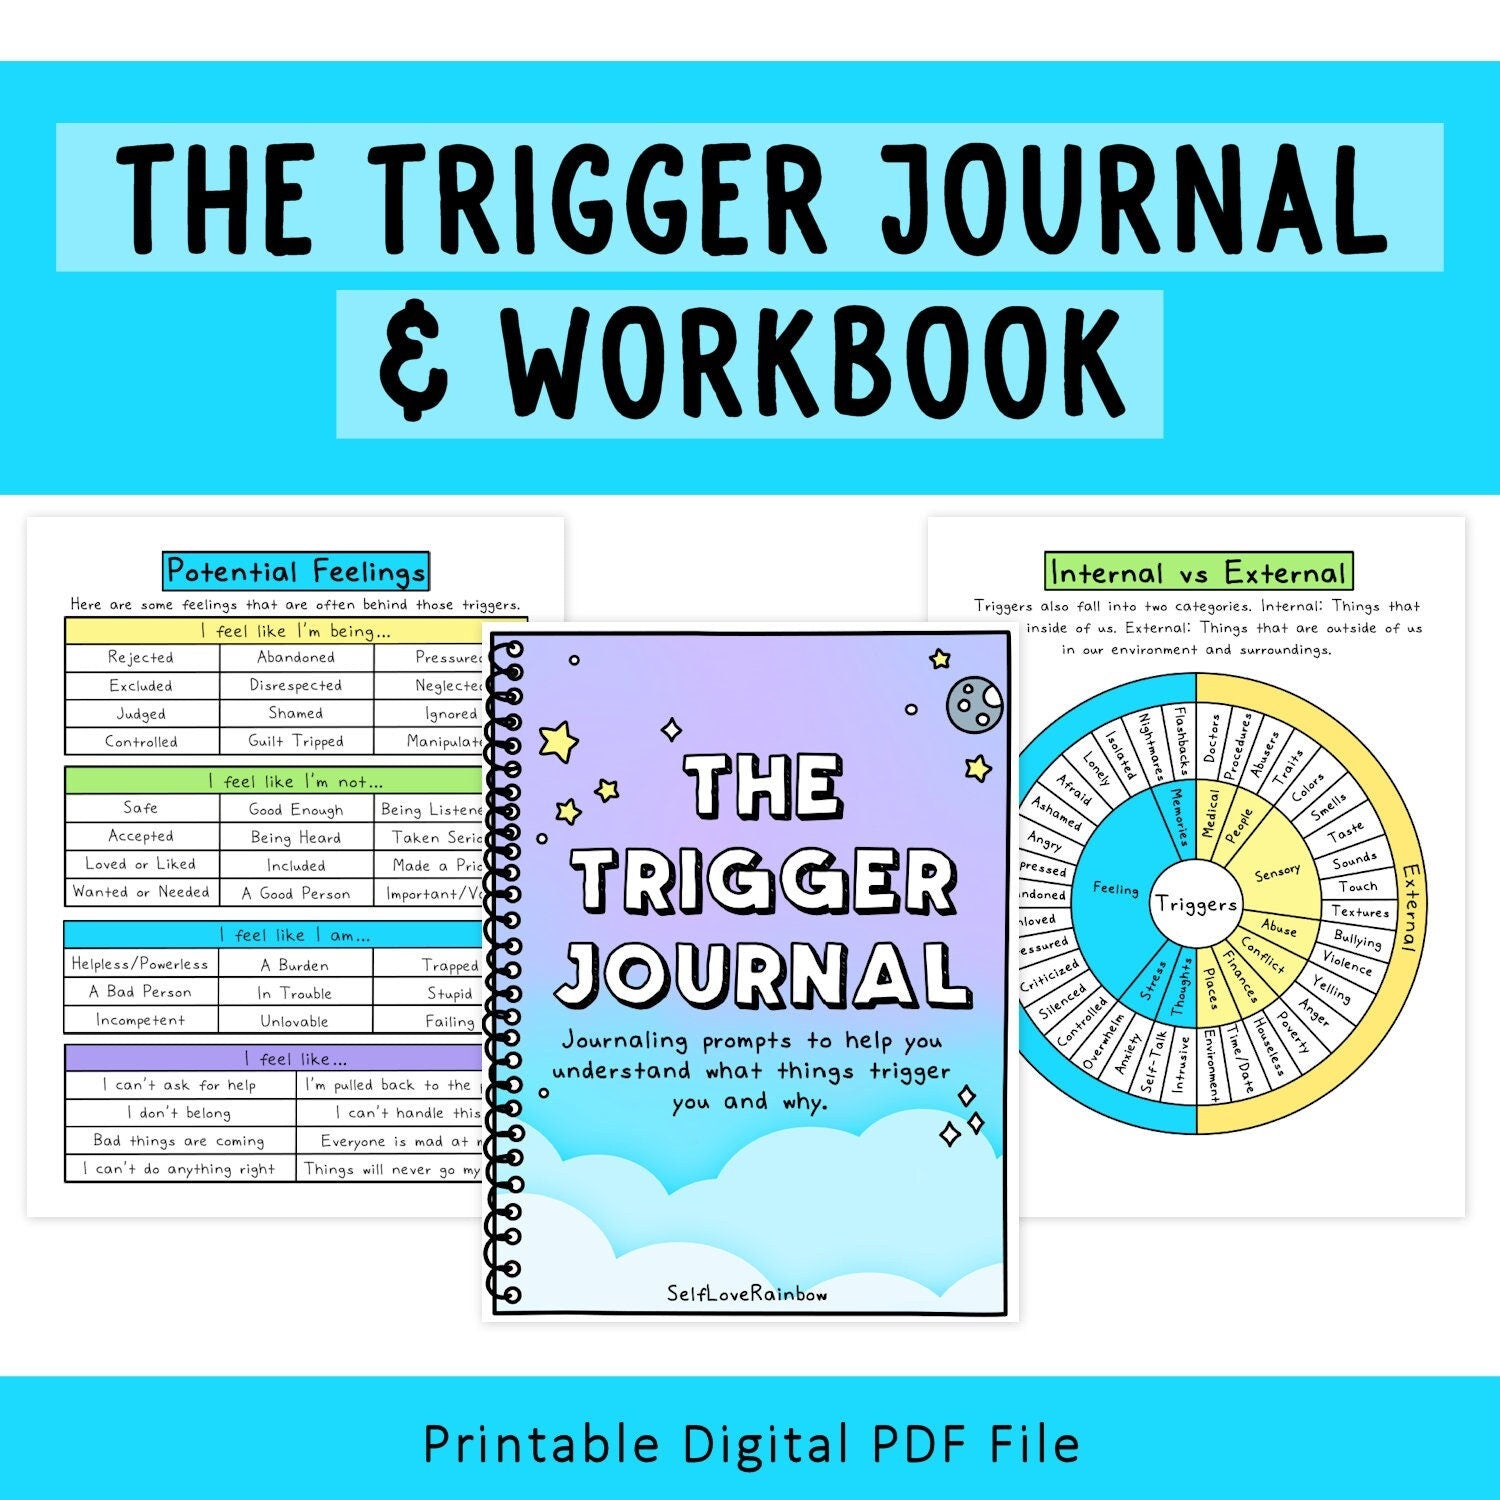 The Trigger Journal